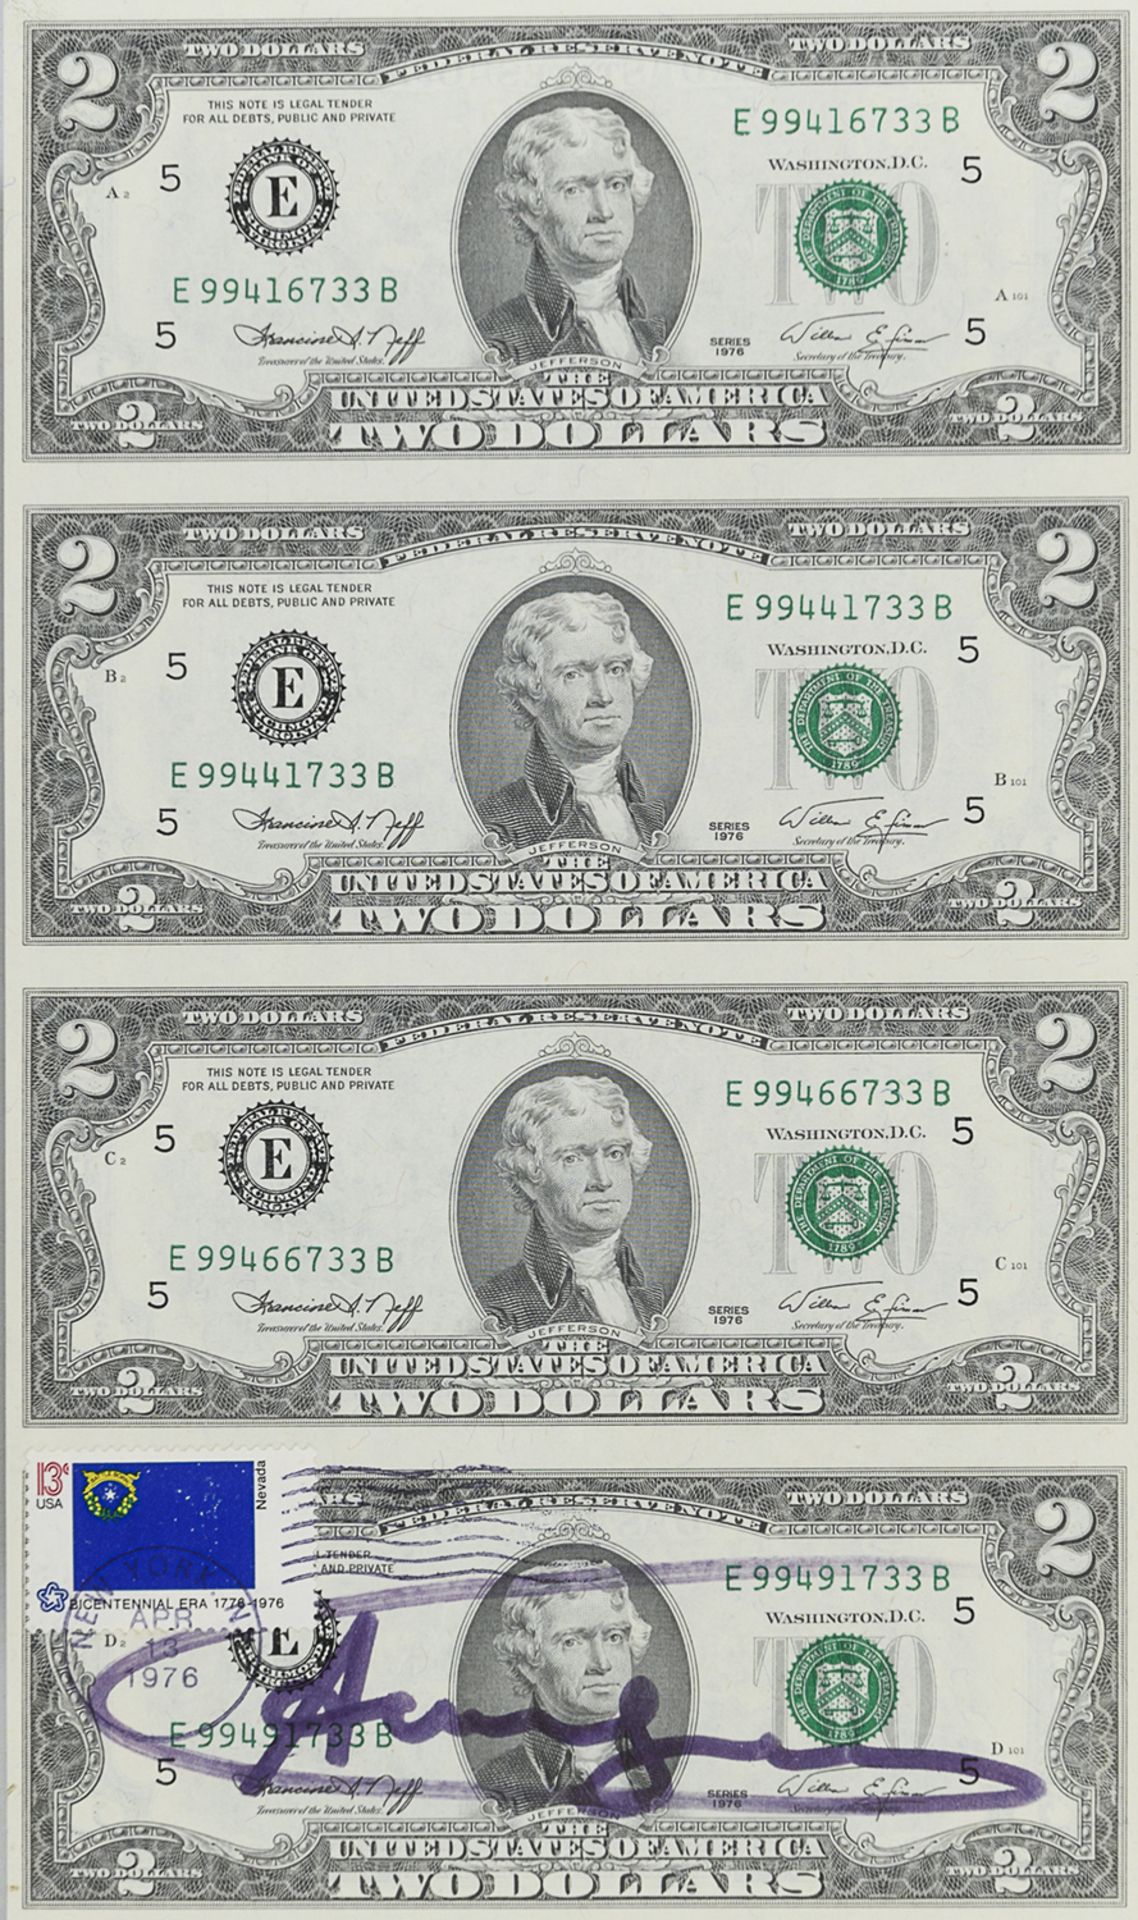 FOUR DOLLAR BANKNOTES BY ANDY WARHOL